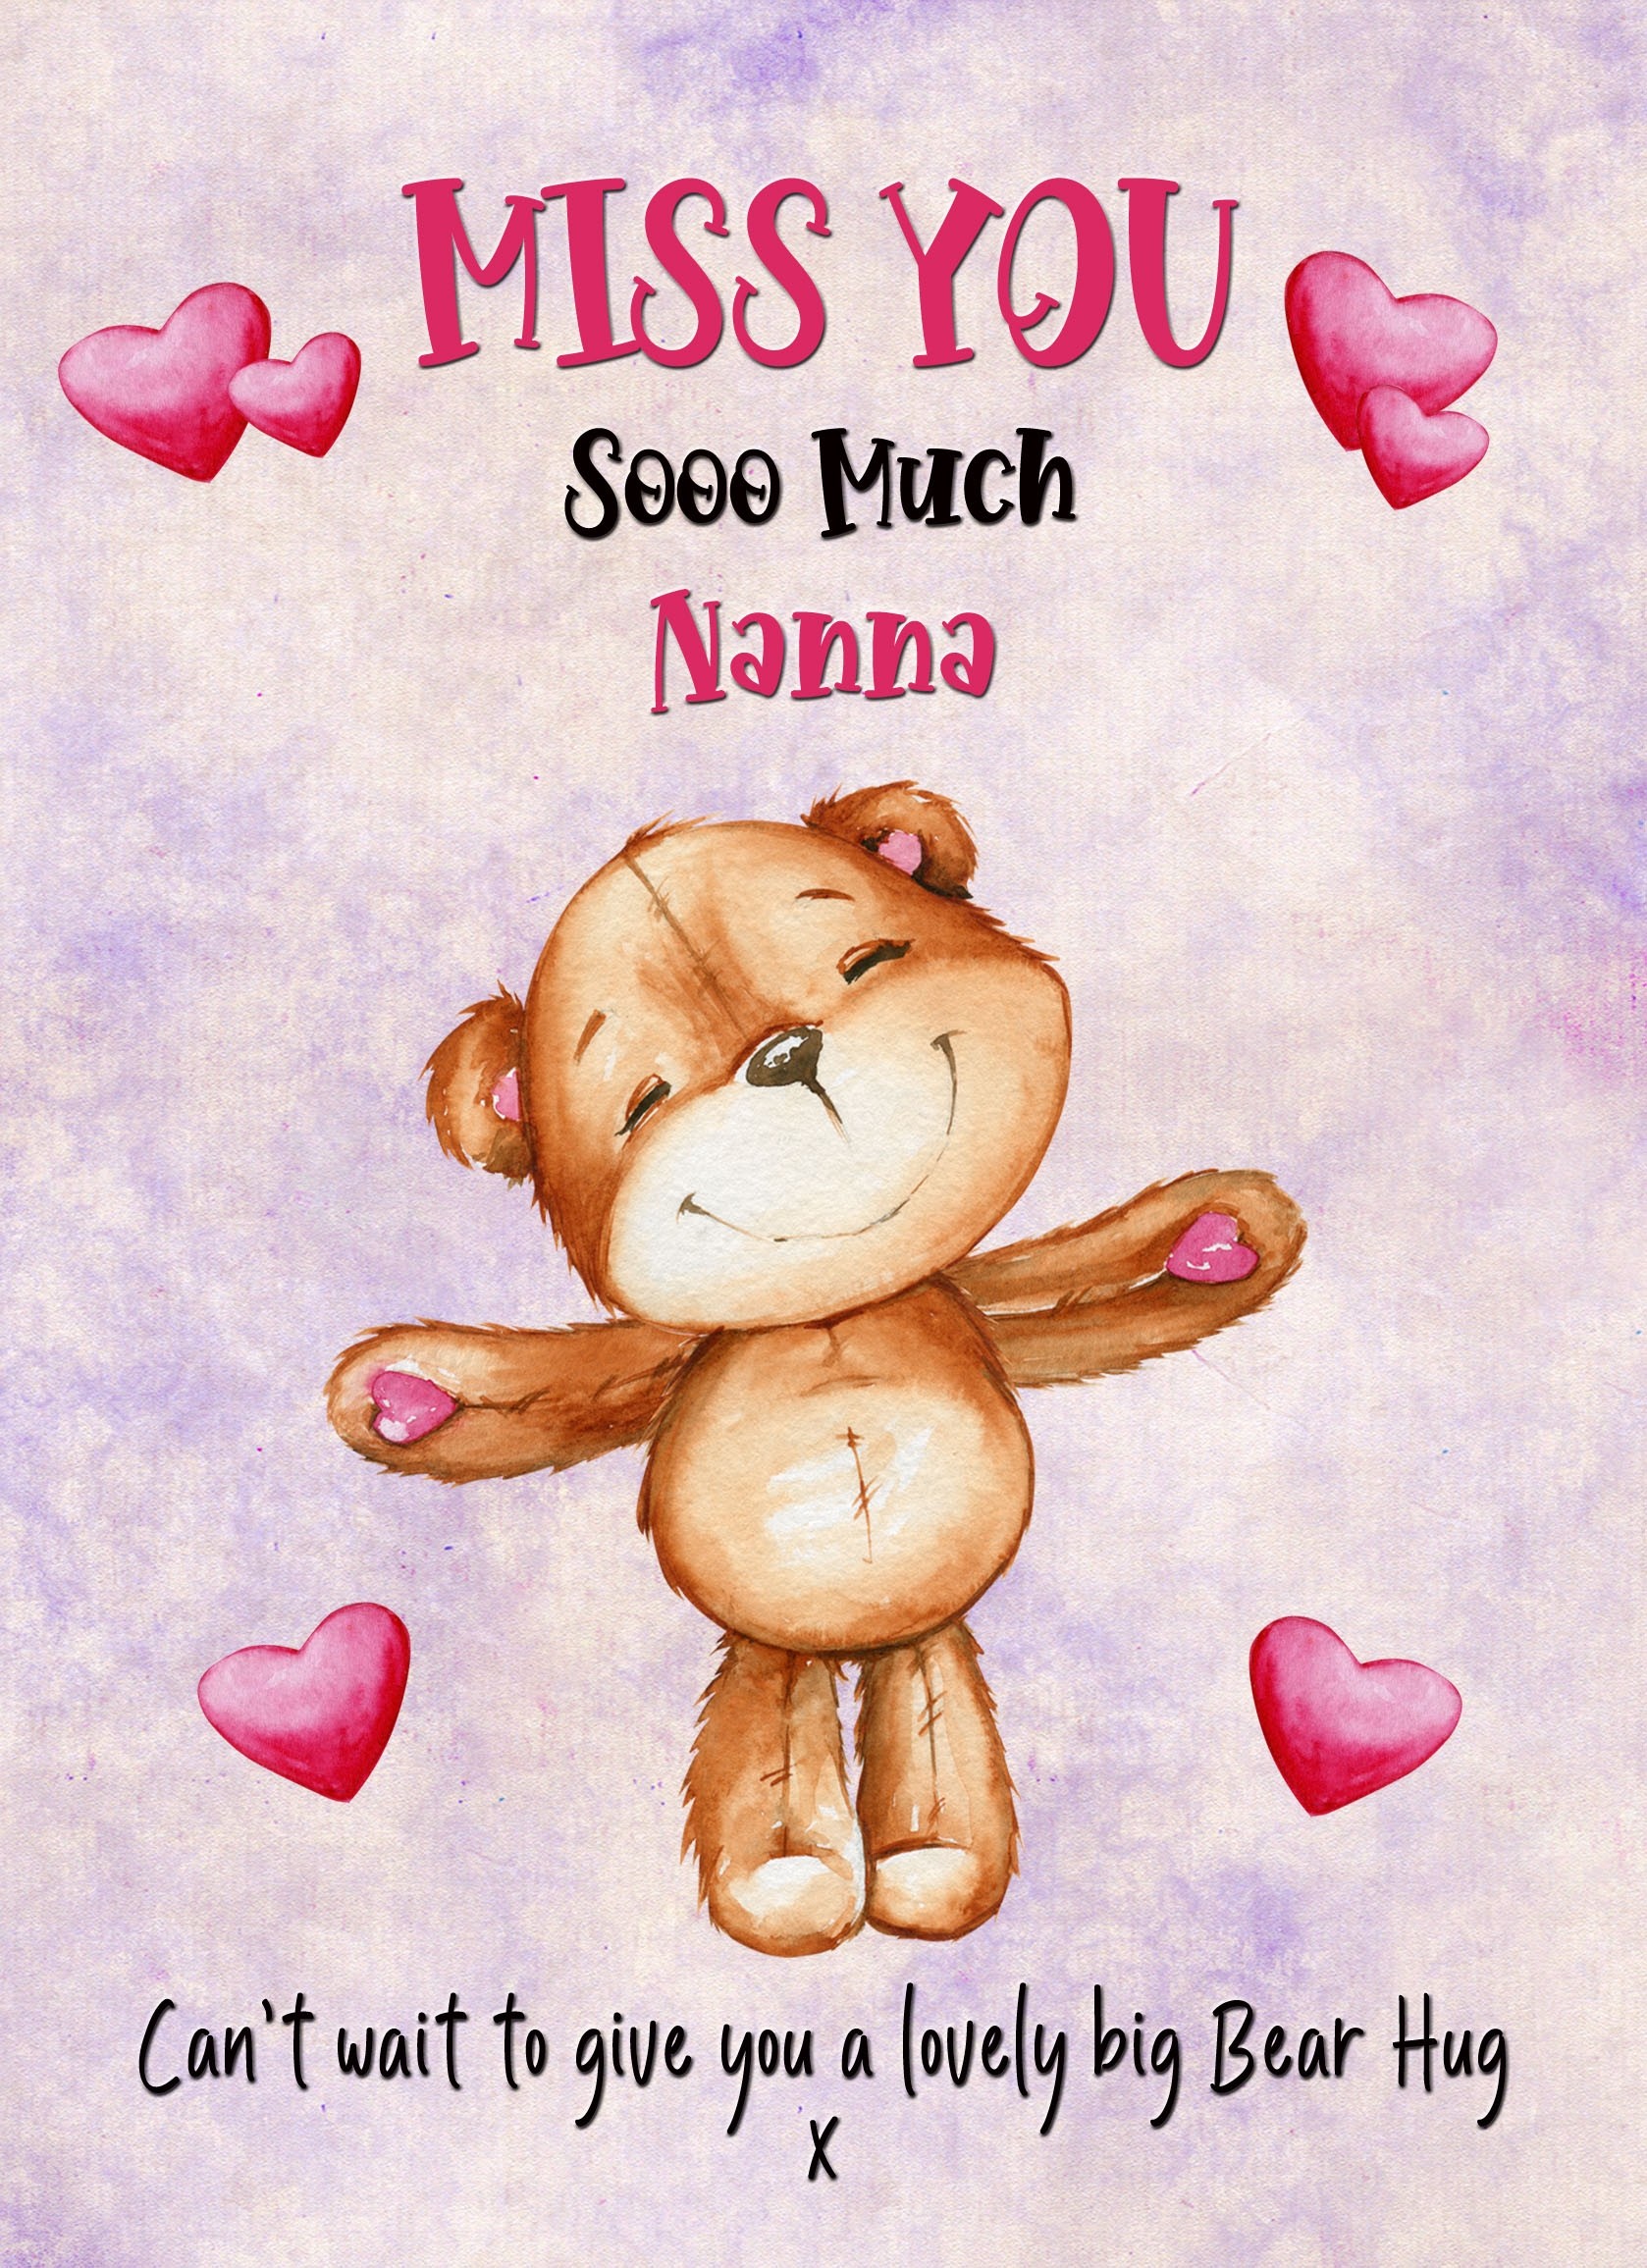 Missing You Card For Nanna (Hearts)